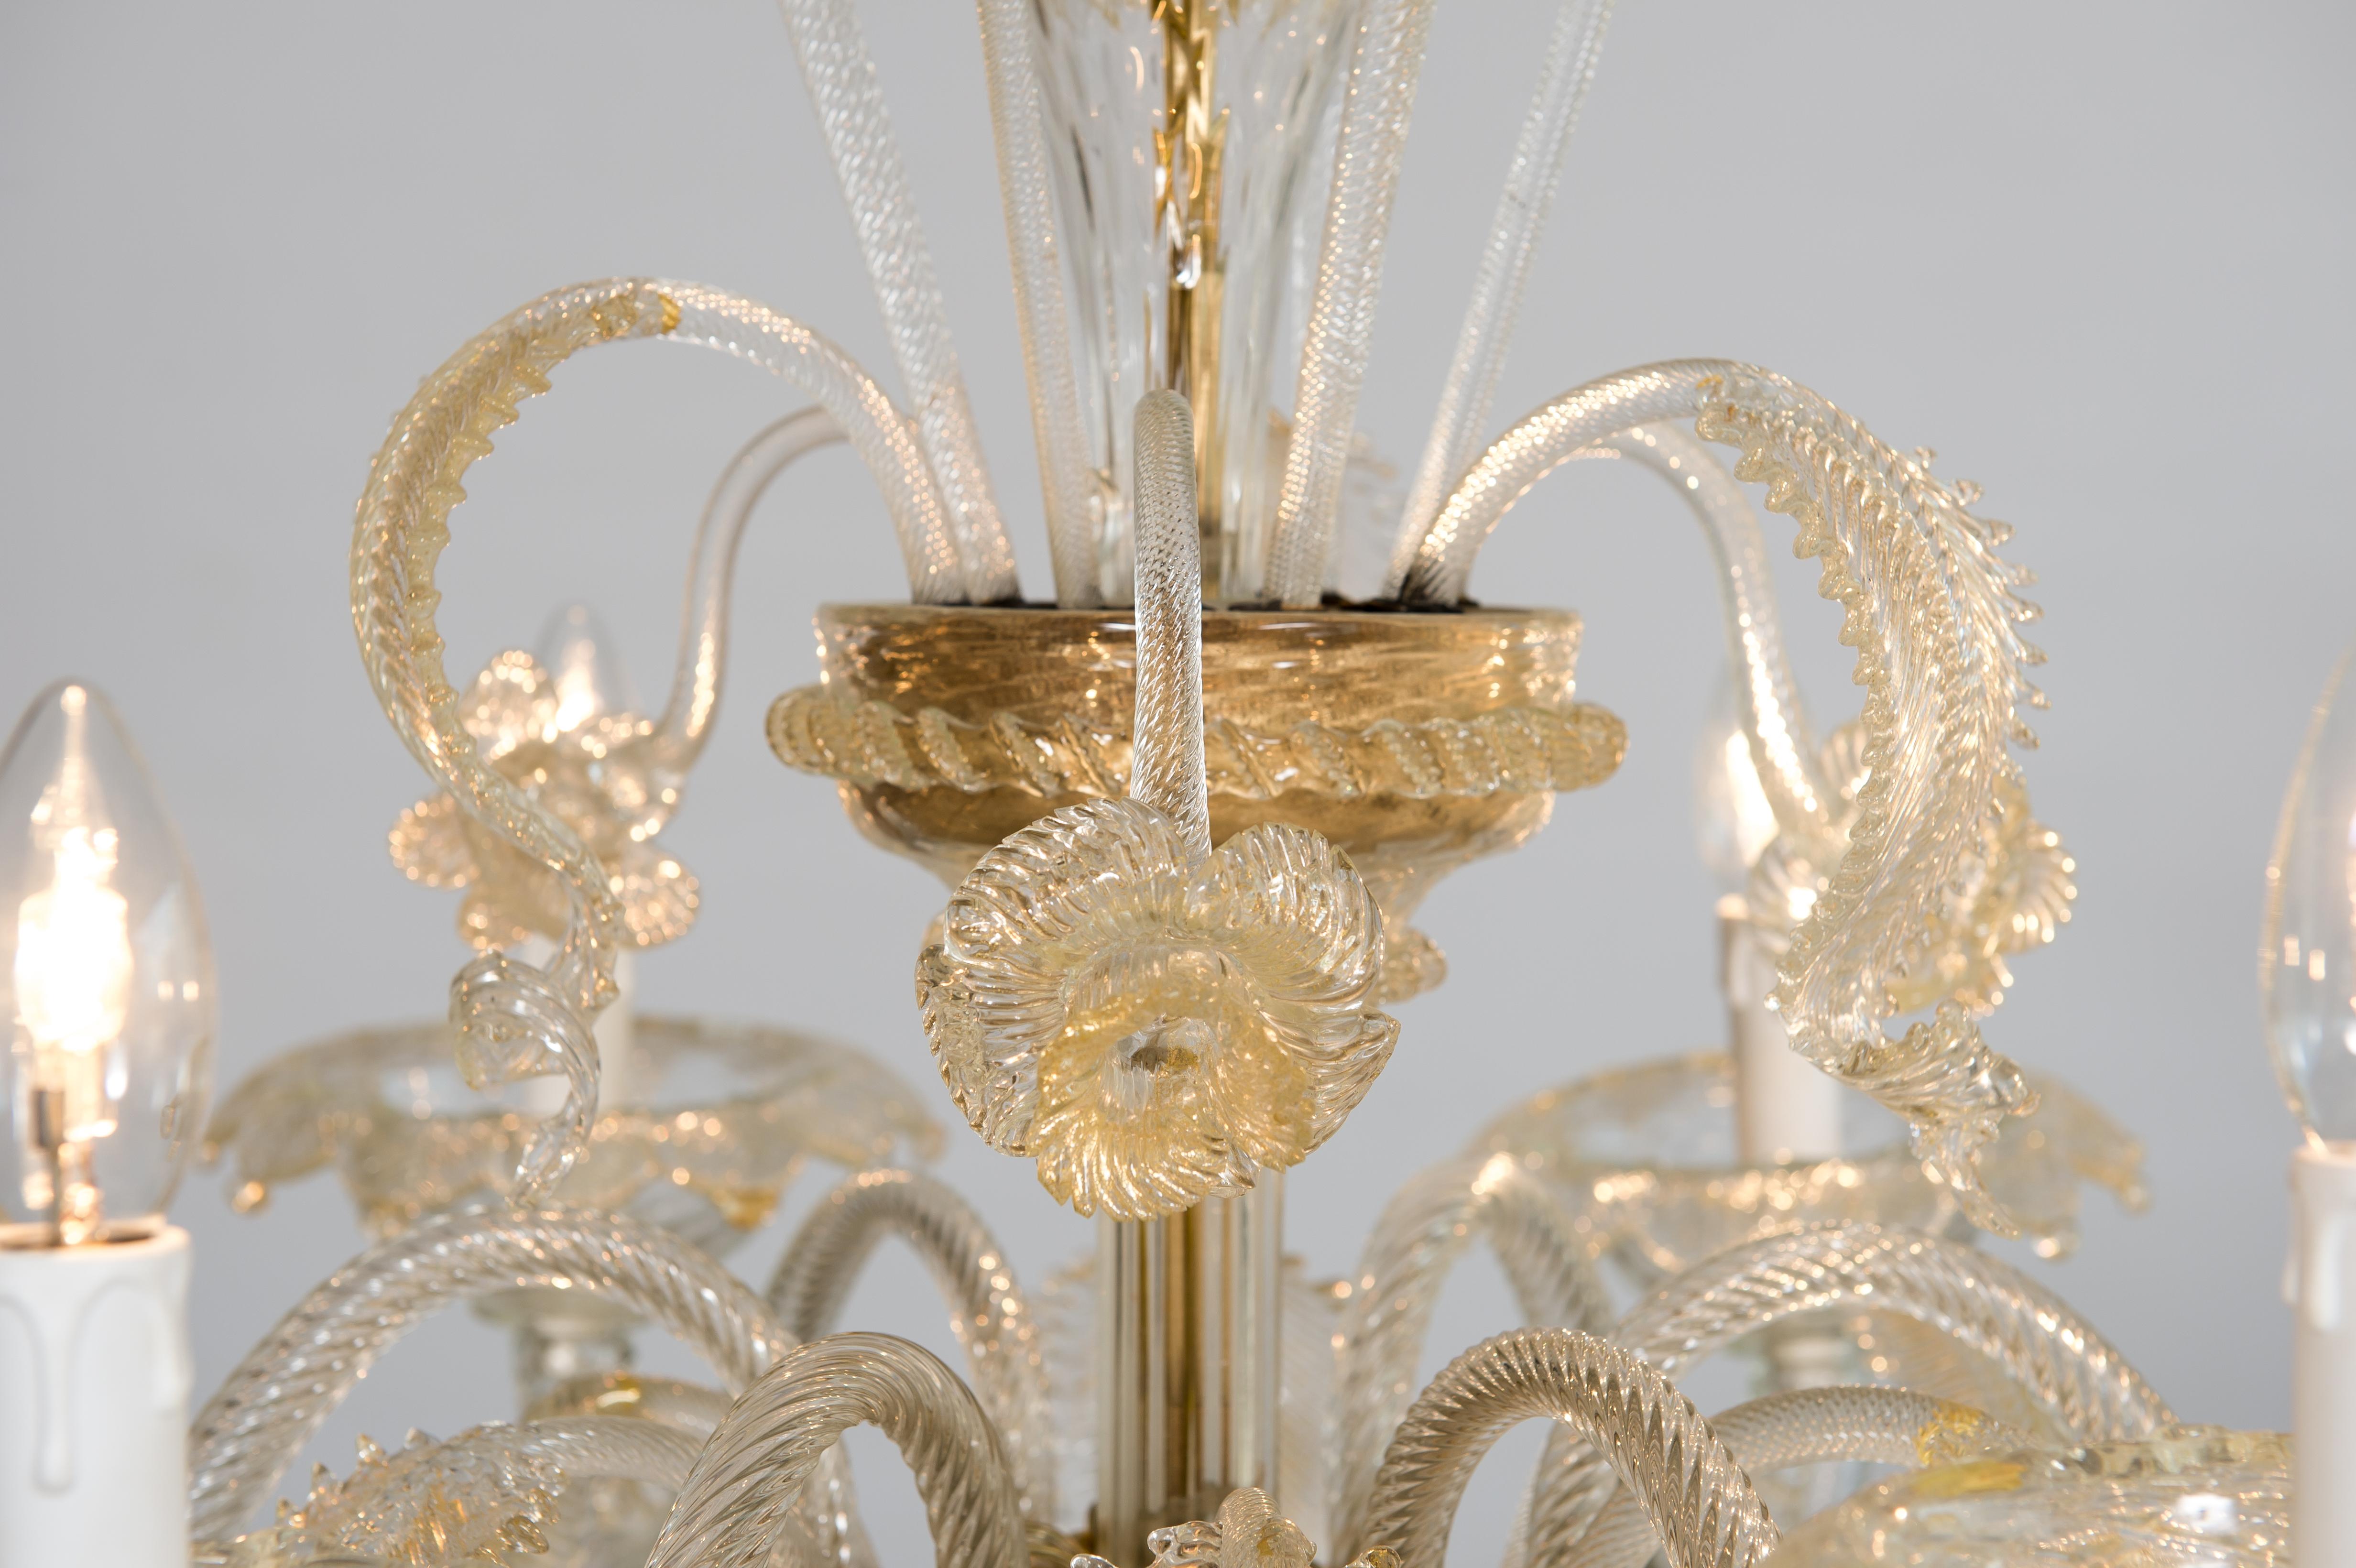 Floral Murano Glass Chandelier with “Riga Dritta” Decorations, 20th Century 10